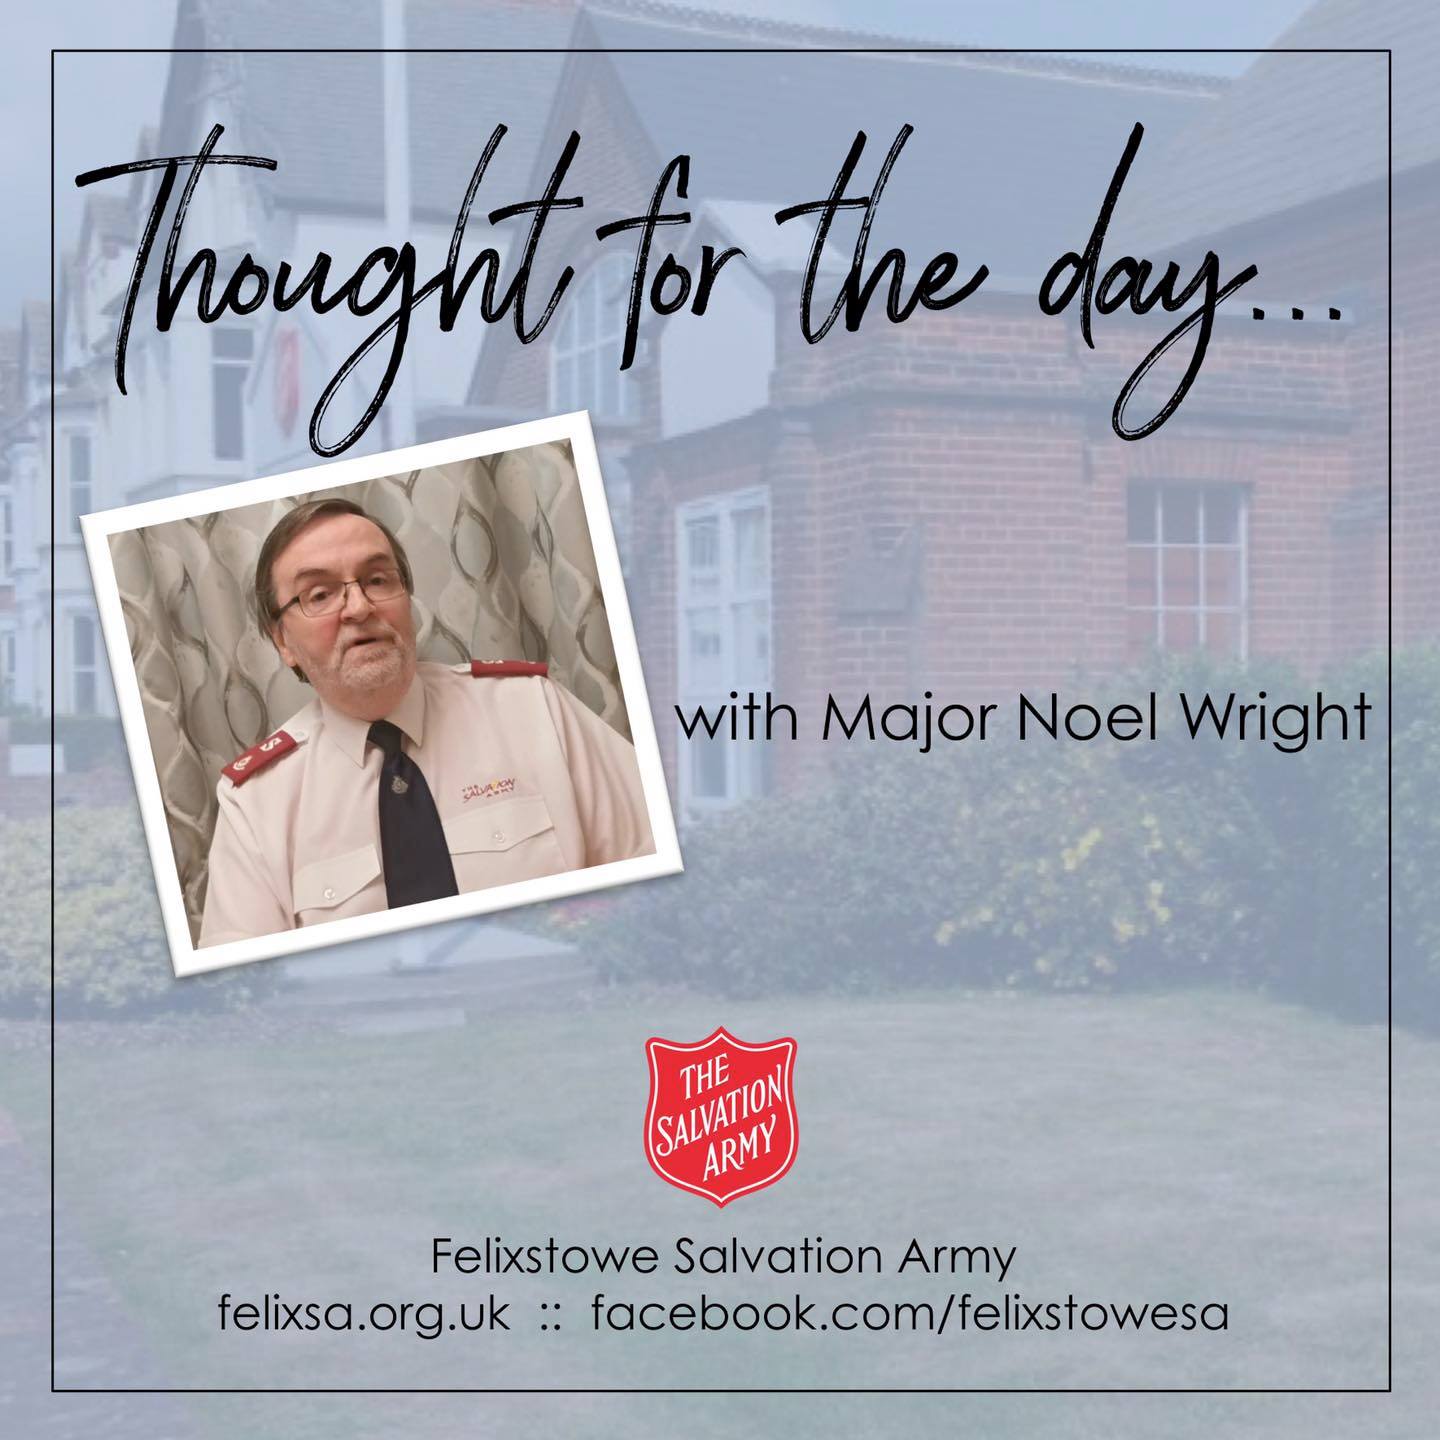 Thought for the Day with Major Noel Wright